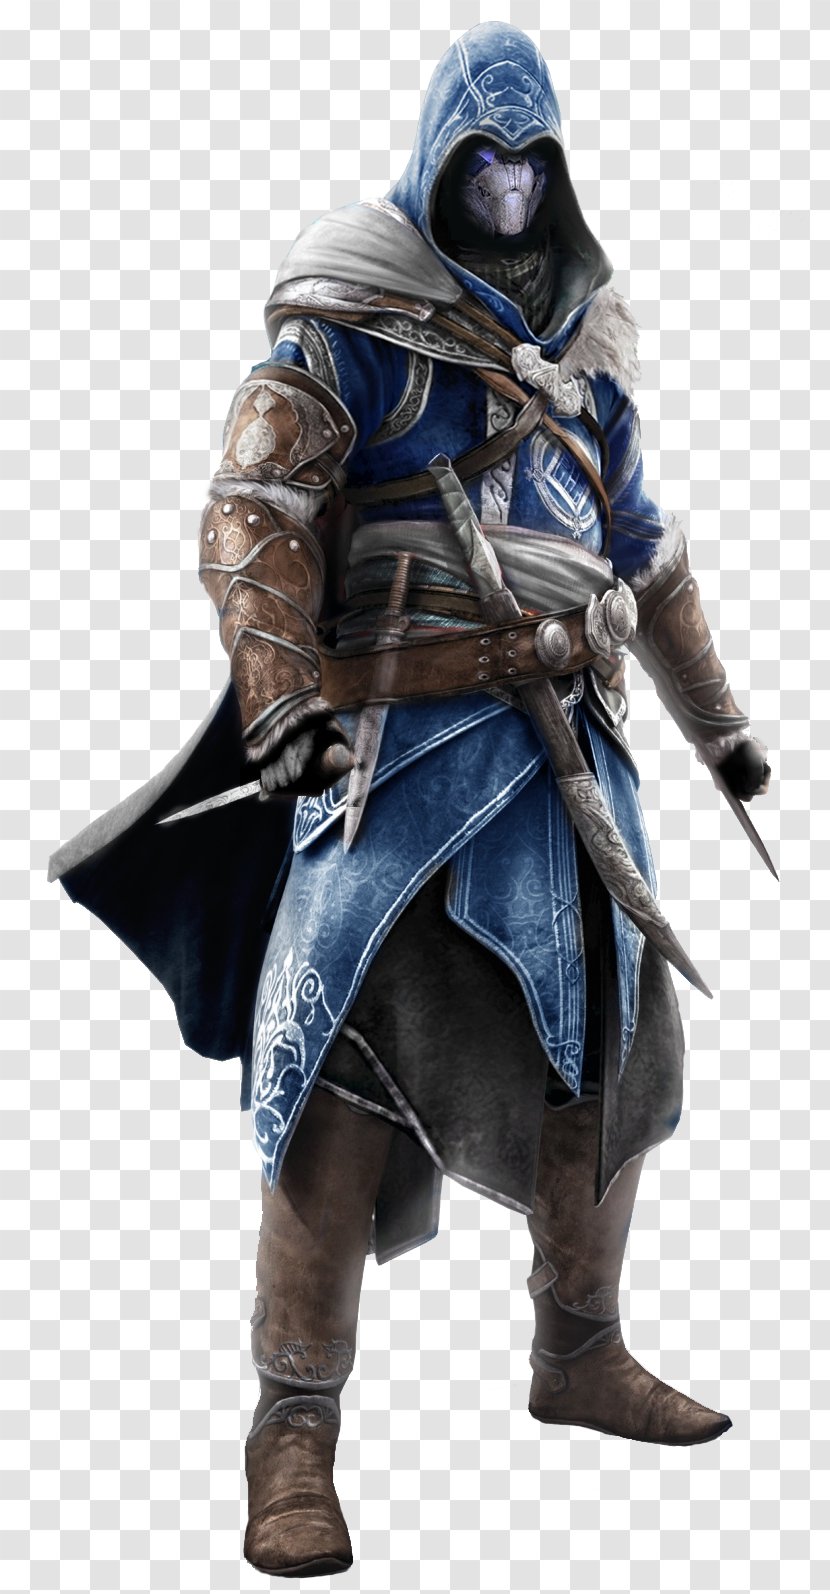 Assassin's Creed: Revelations Creed III Brotherhood Ezio Auditore - Video Game Transparent PNG